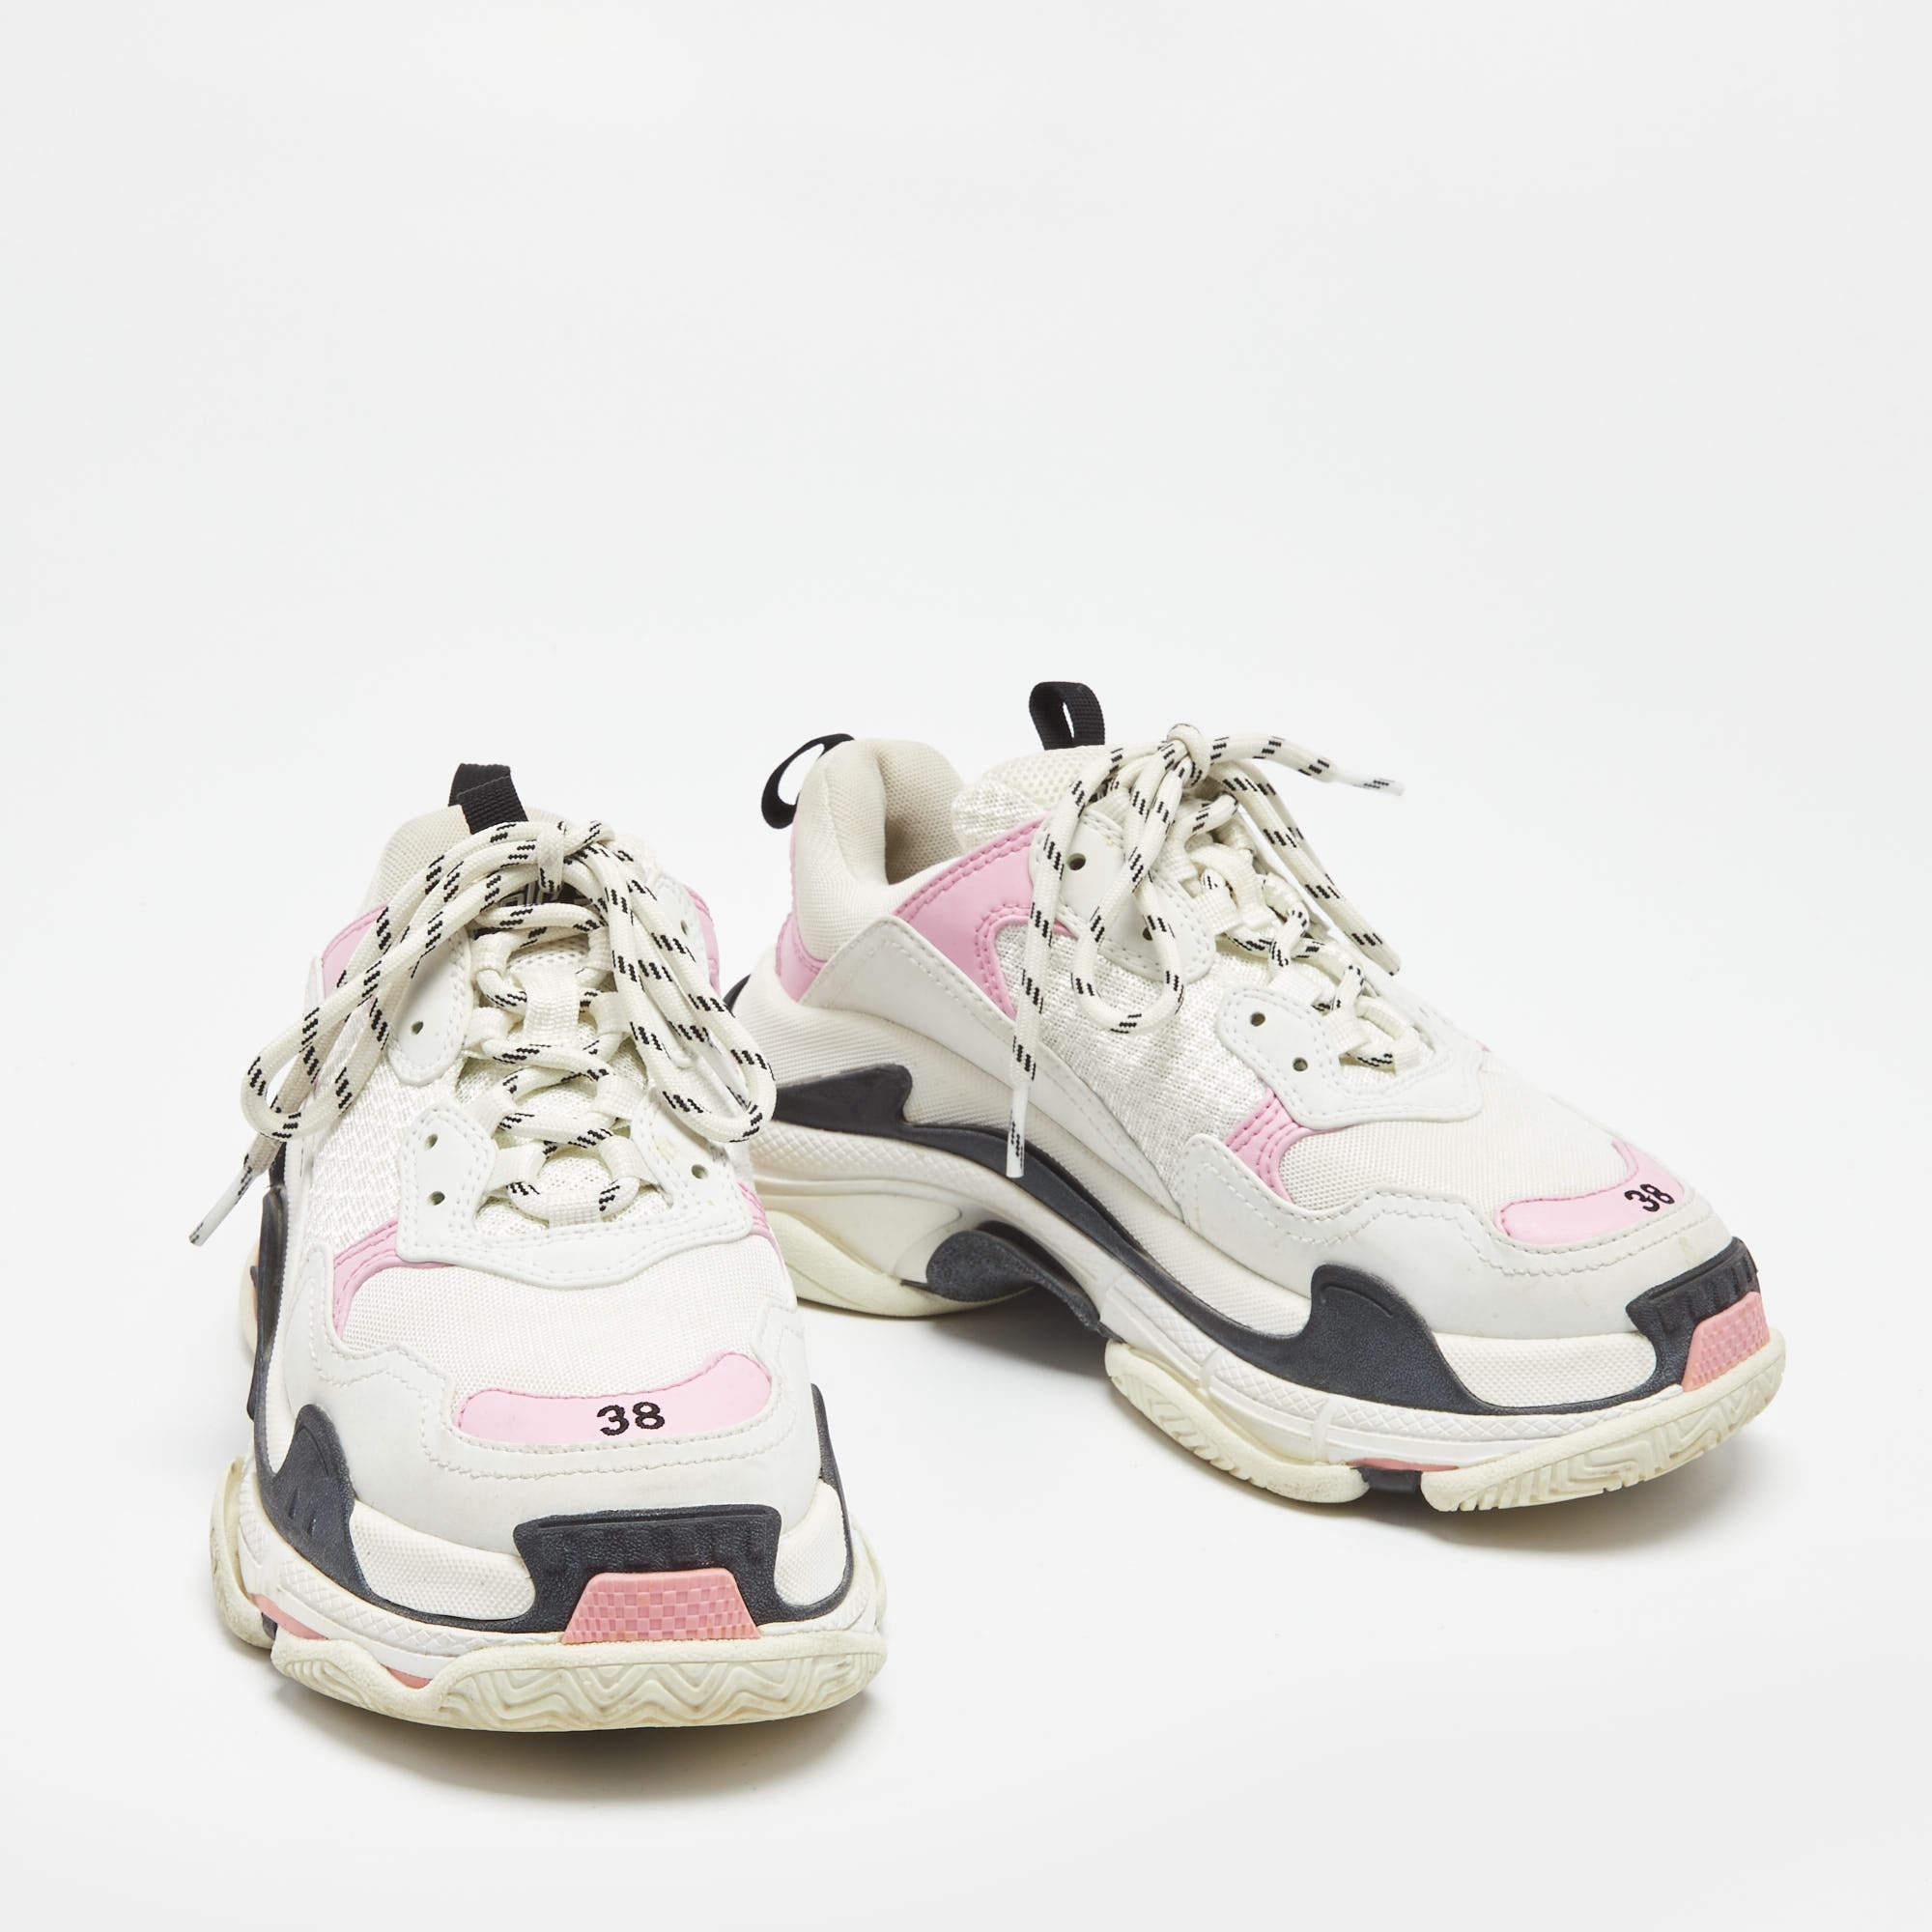 Balenciaga White/Pink Leather and Mesh Triple S Sneakers Size 38 1